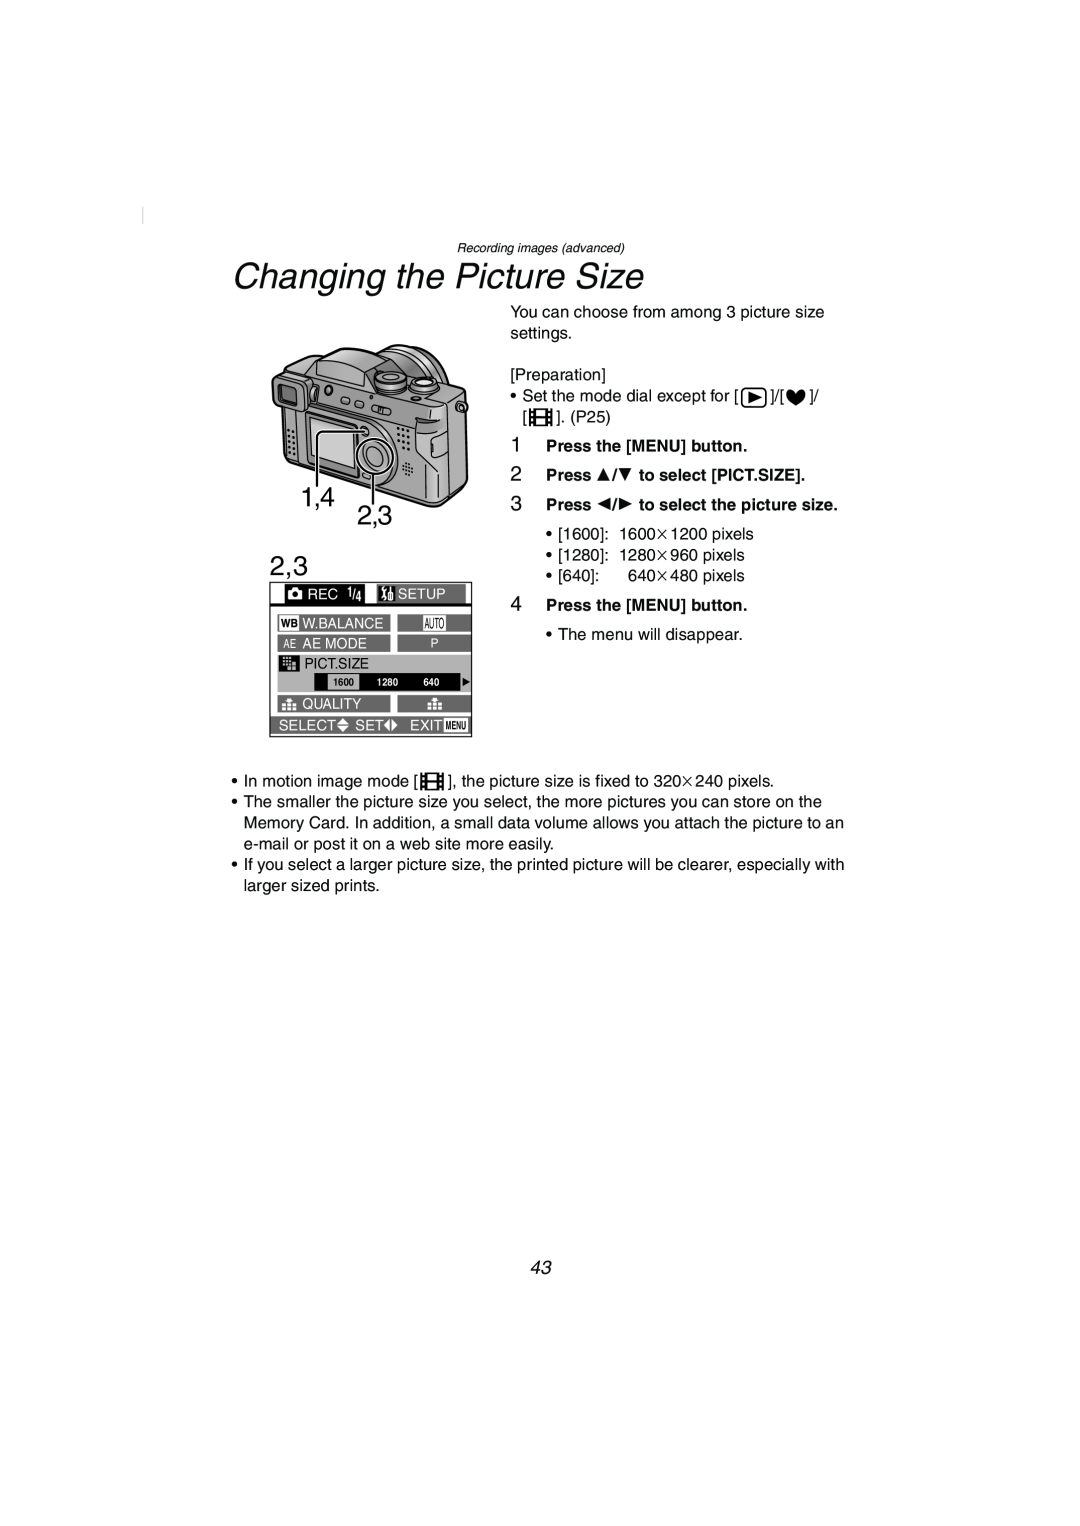 Panasonic DMC-FZ2PP Changing the Picture Size, Press the MENU button 2 Press 3/4 to select PICT.SIZE, Pict.Size 